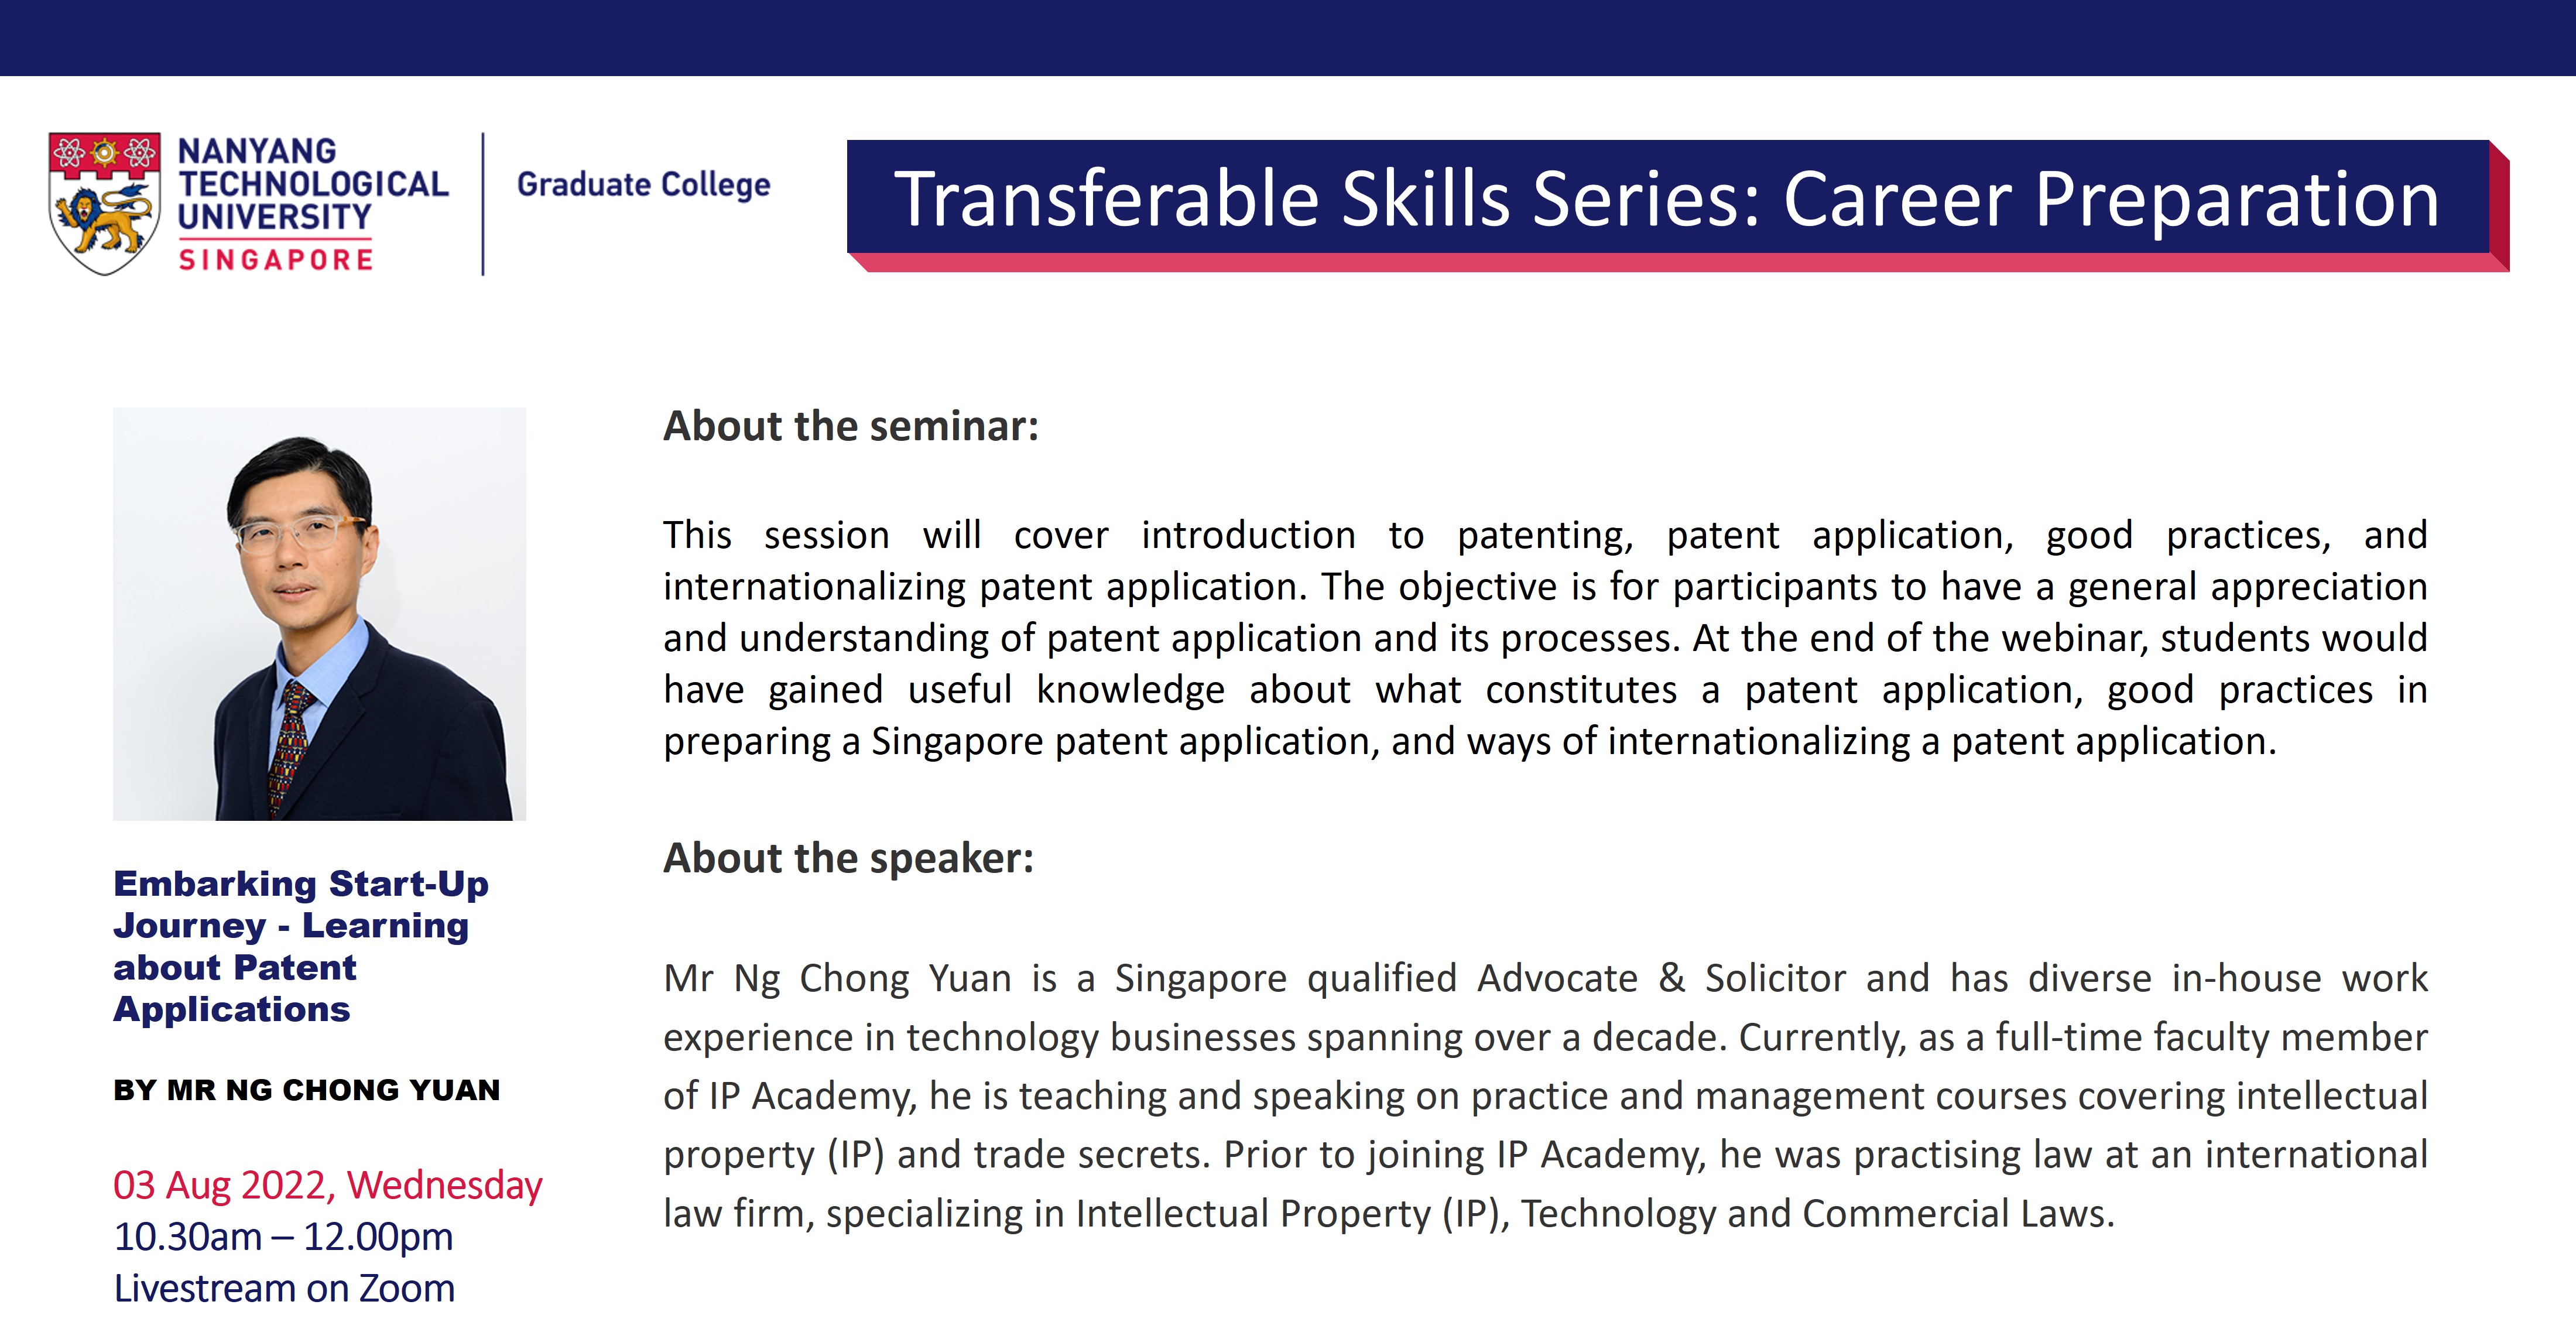 03 Aug 22 - Embarking Start-Up Journey - Learning about Patent Applications